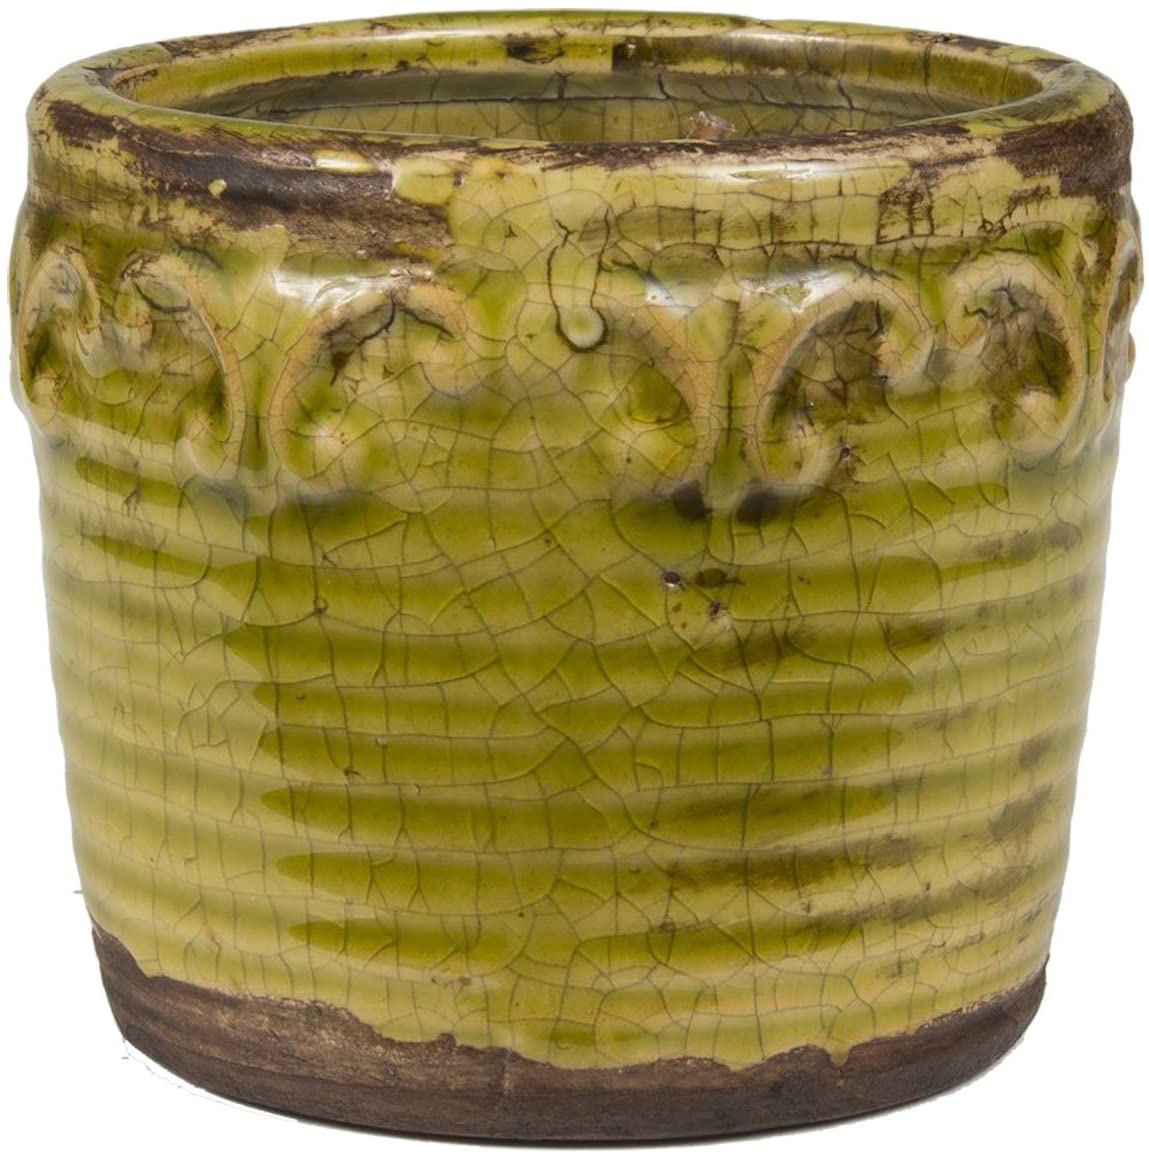 short round candle in olive green canister with distressed finish.